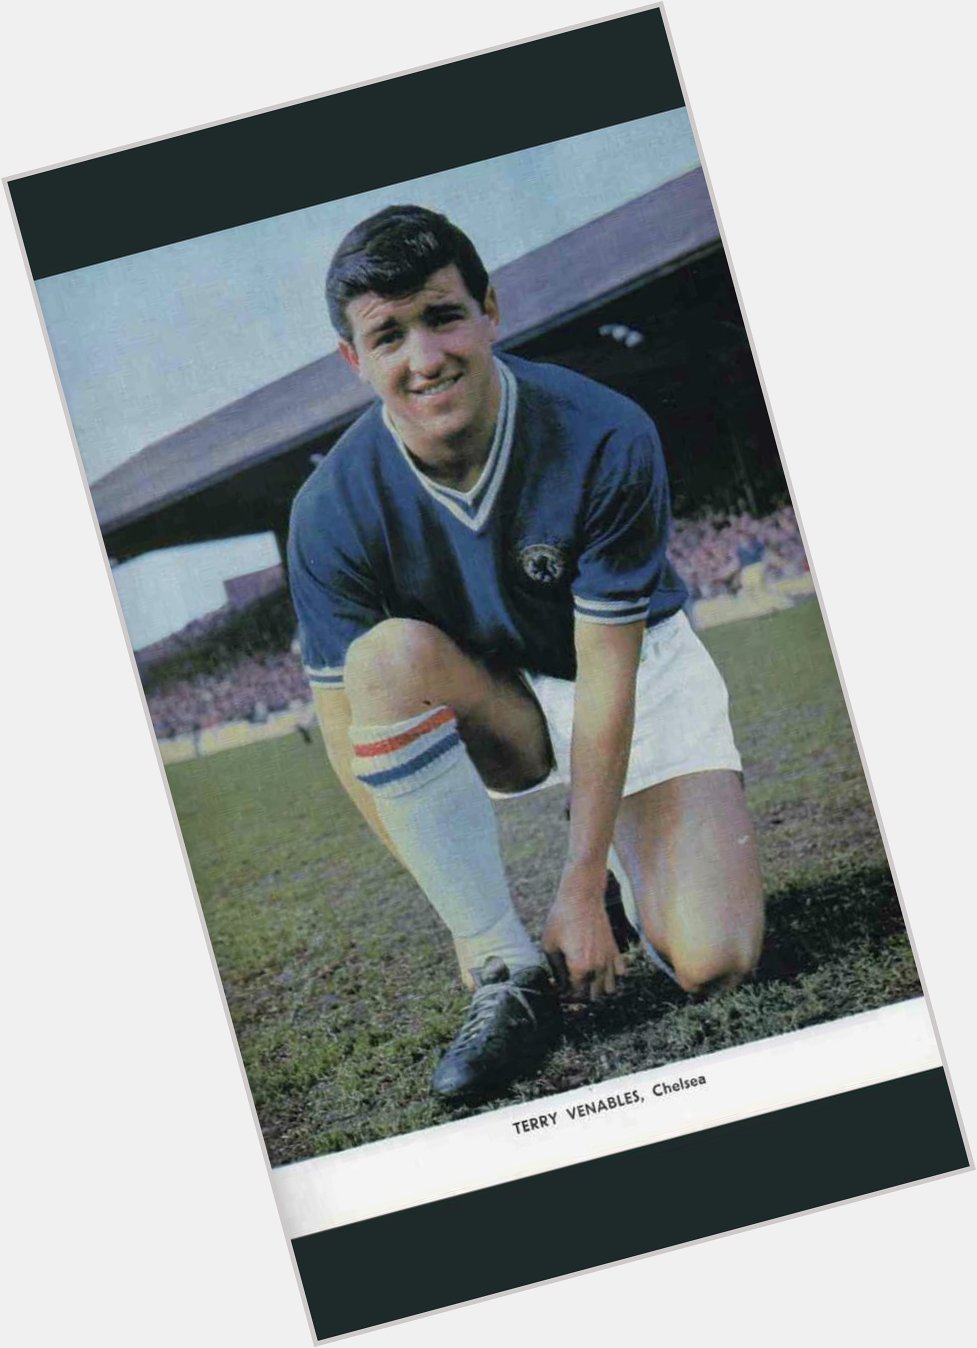 Finally - Happy 74th Birthday to former Player Terry Venables 